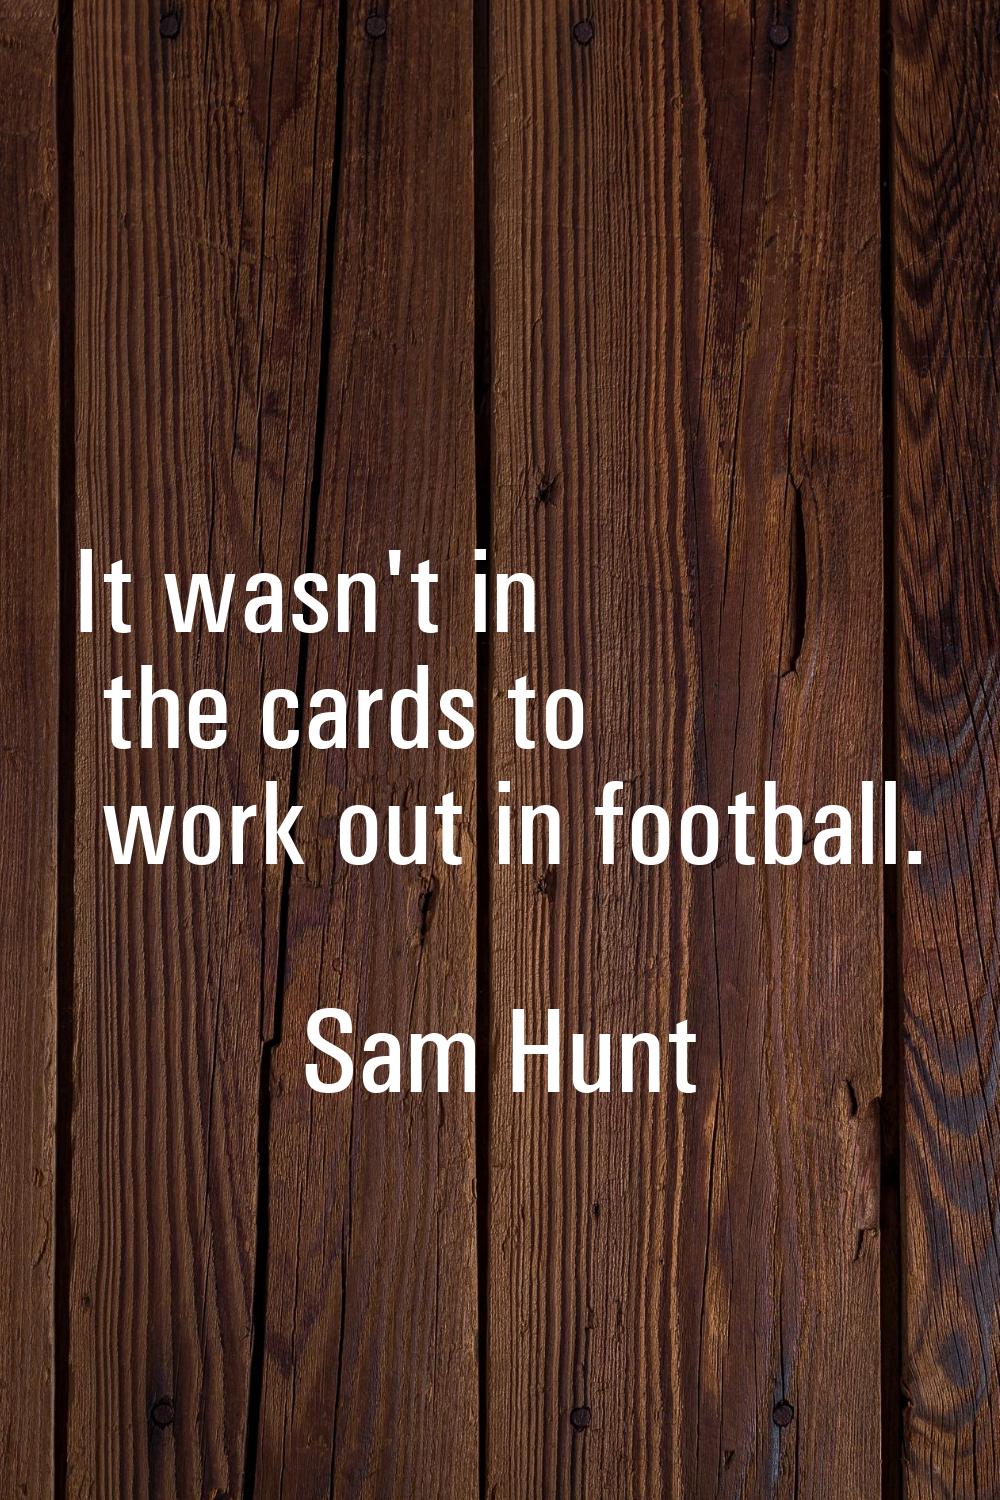 It wasn't in the cards to work out in football.